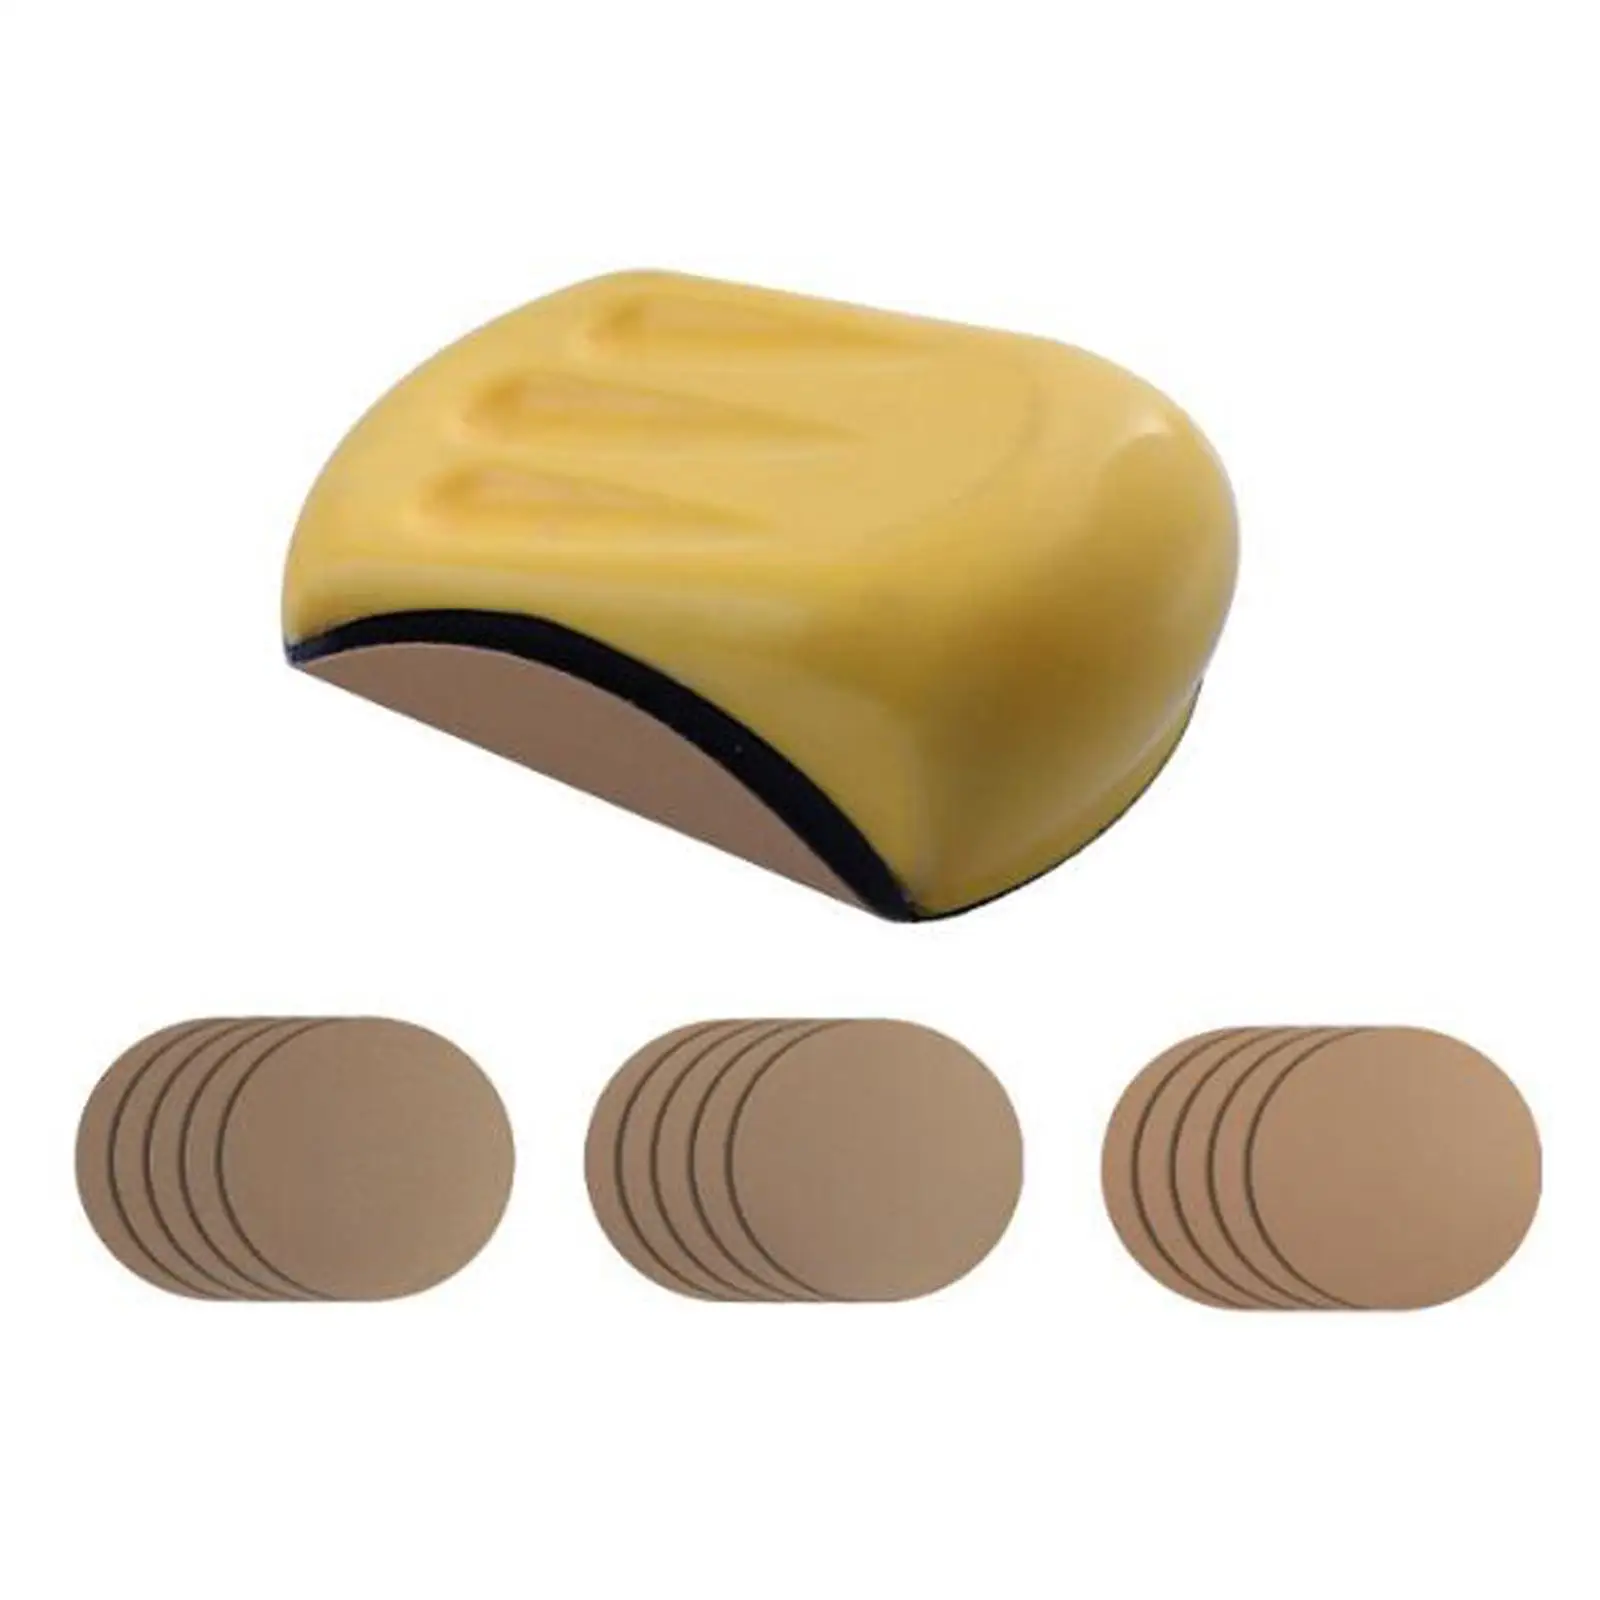 Portable Sanding Kit Self Adhesive Sanding Disc Mini Sander for Small Projects Wood Products Finishing Polishing